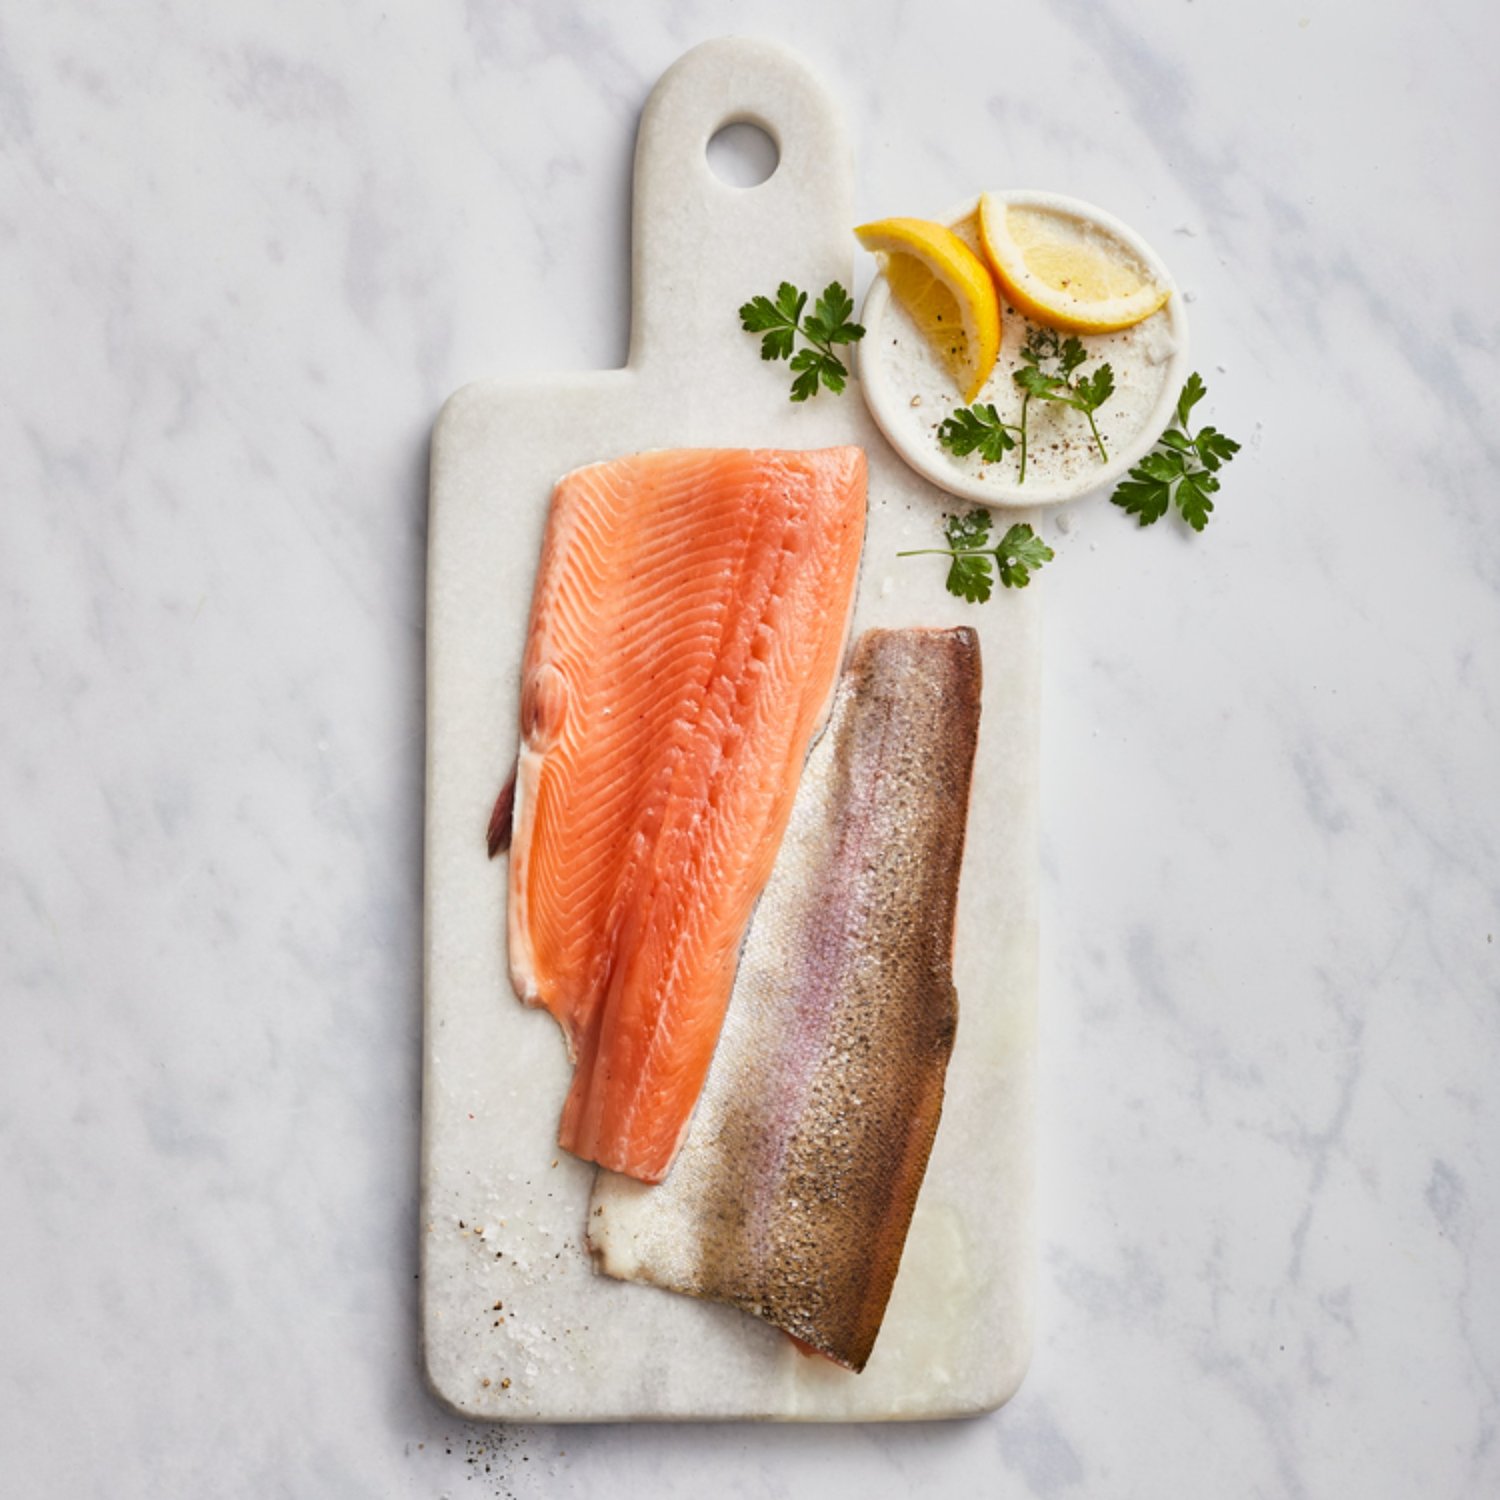 Dunnes Stores Fishmonger Rainbow Trout Fillet 140g - Dunnes Stores